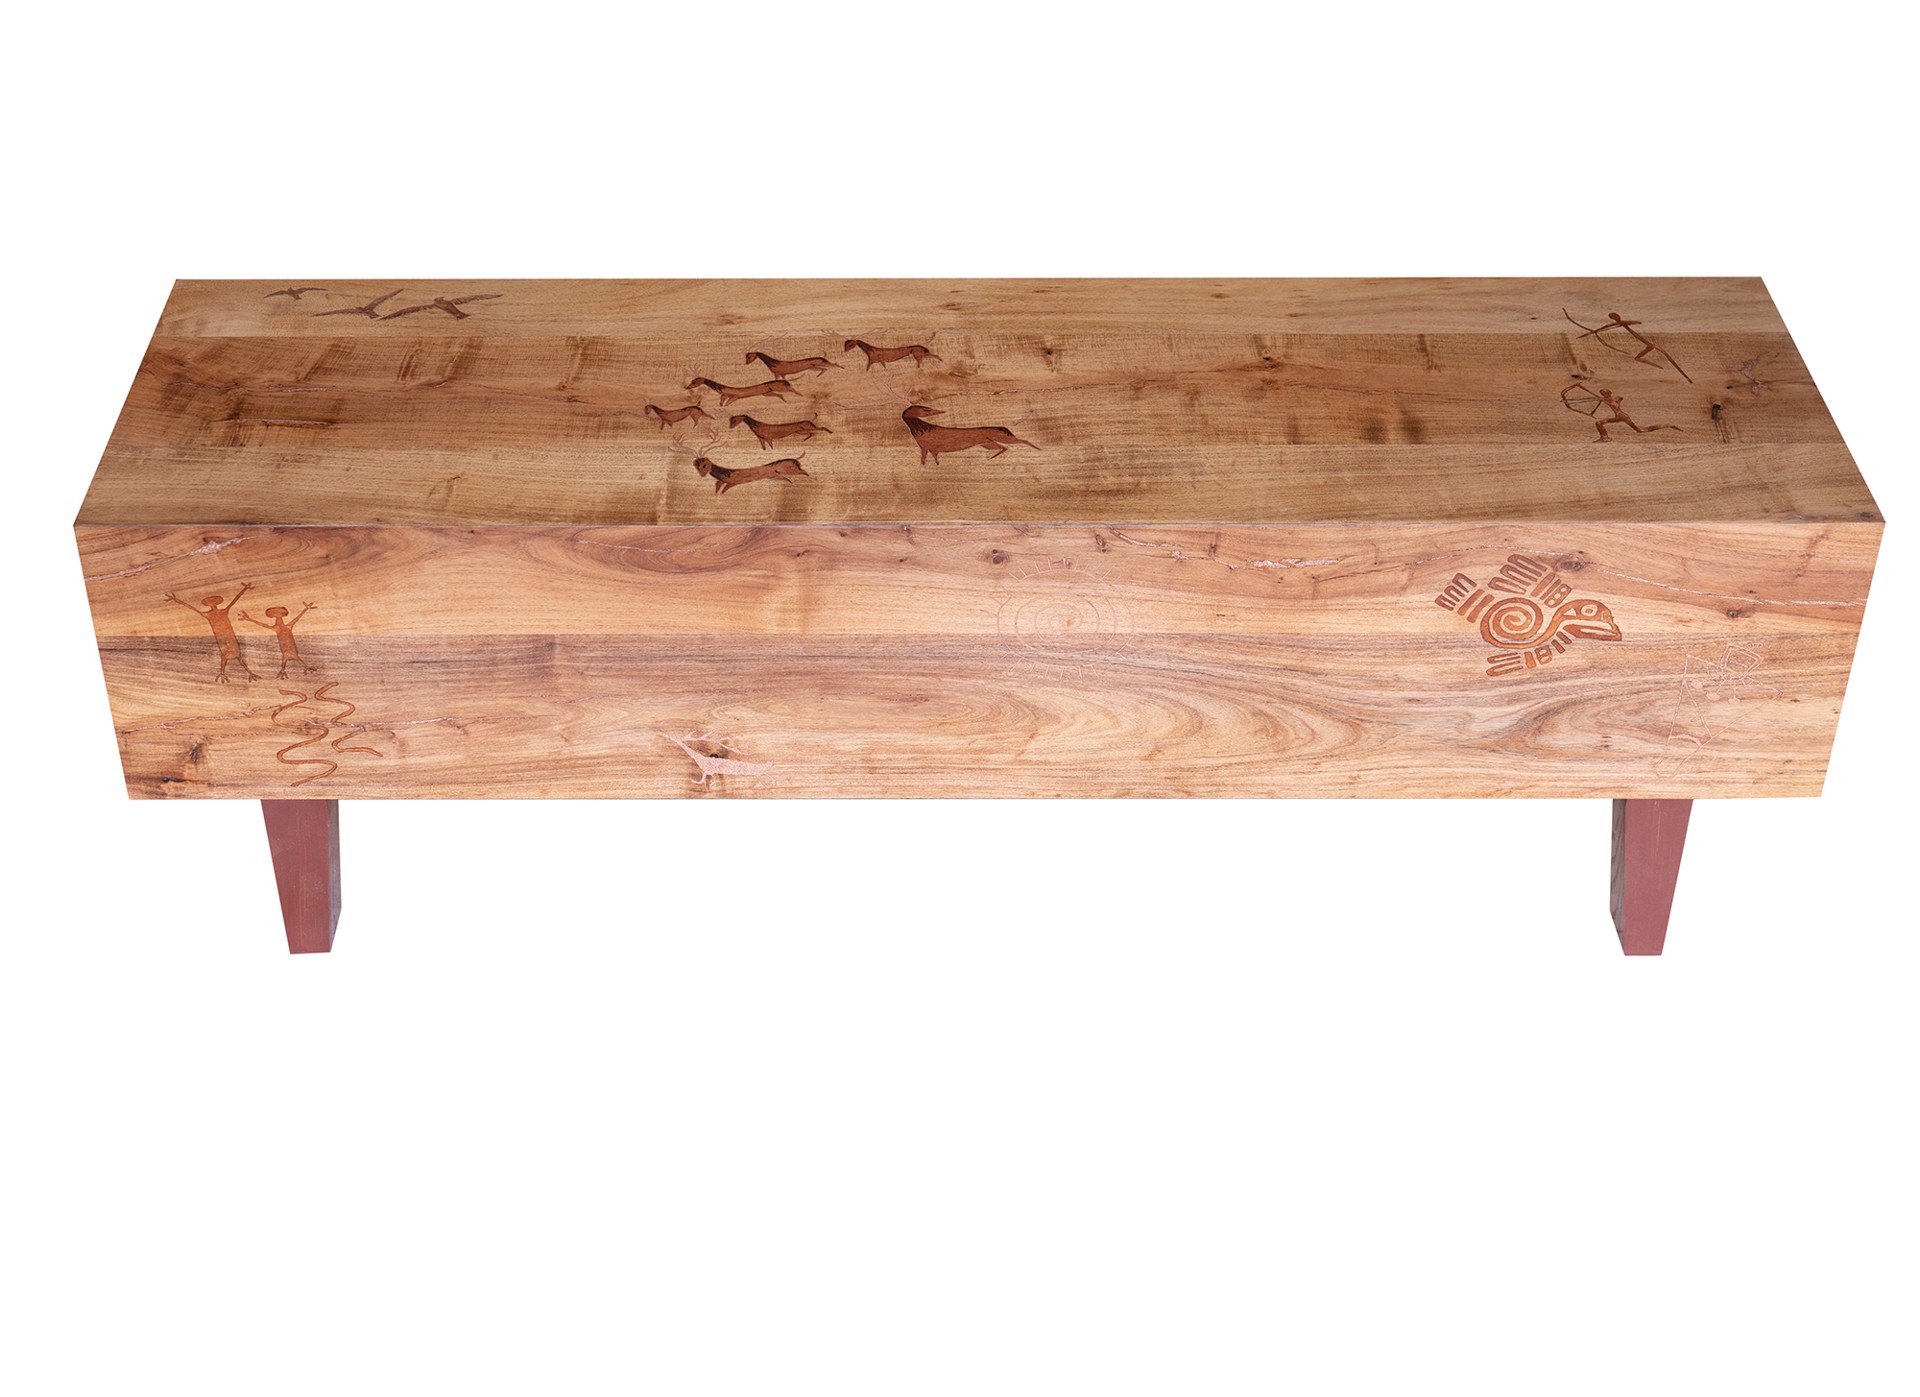 Mesquite Beam Style Low Table with Inset Copper and Resin With Hand Painted Elements by Douglas Foulke